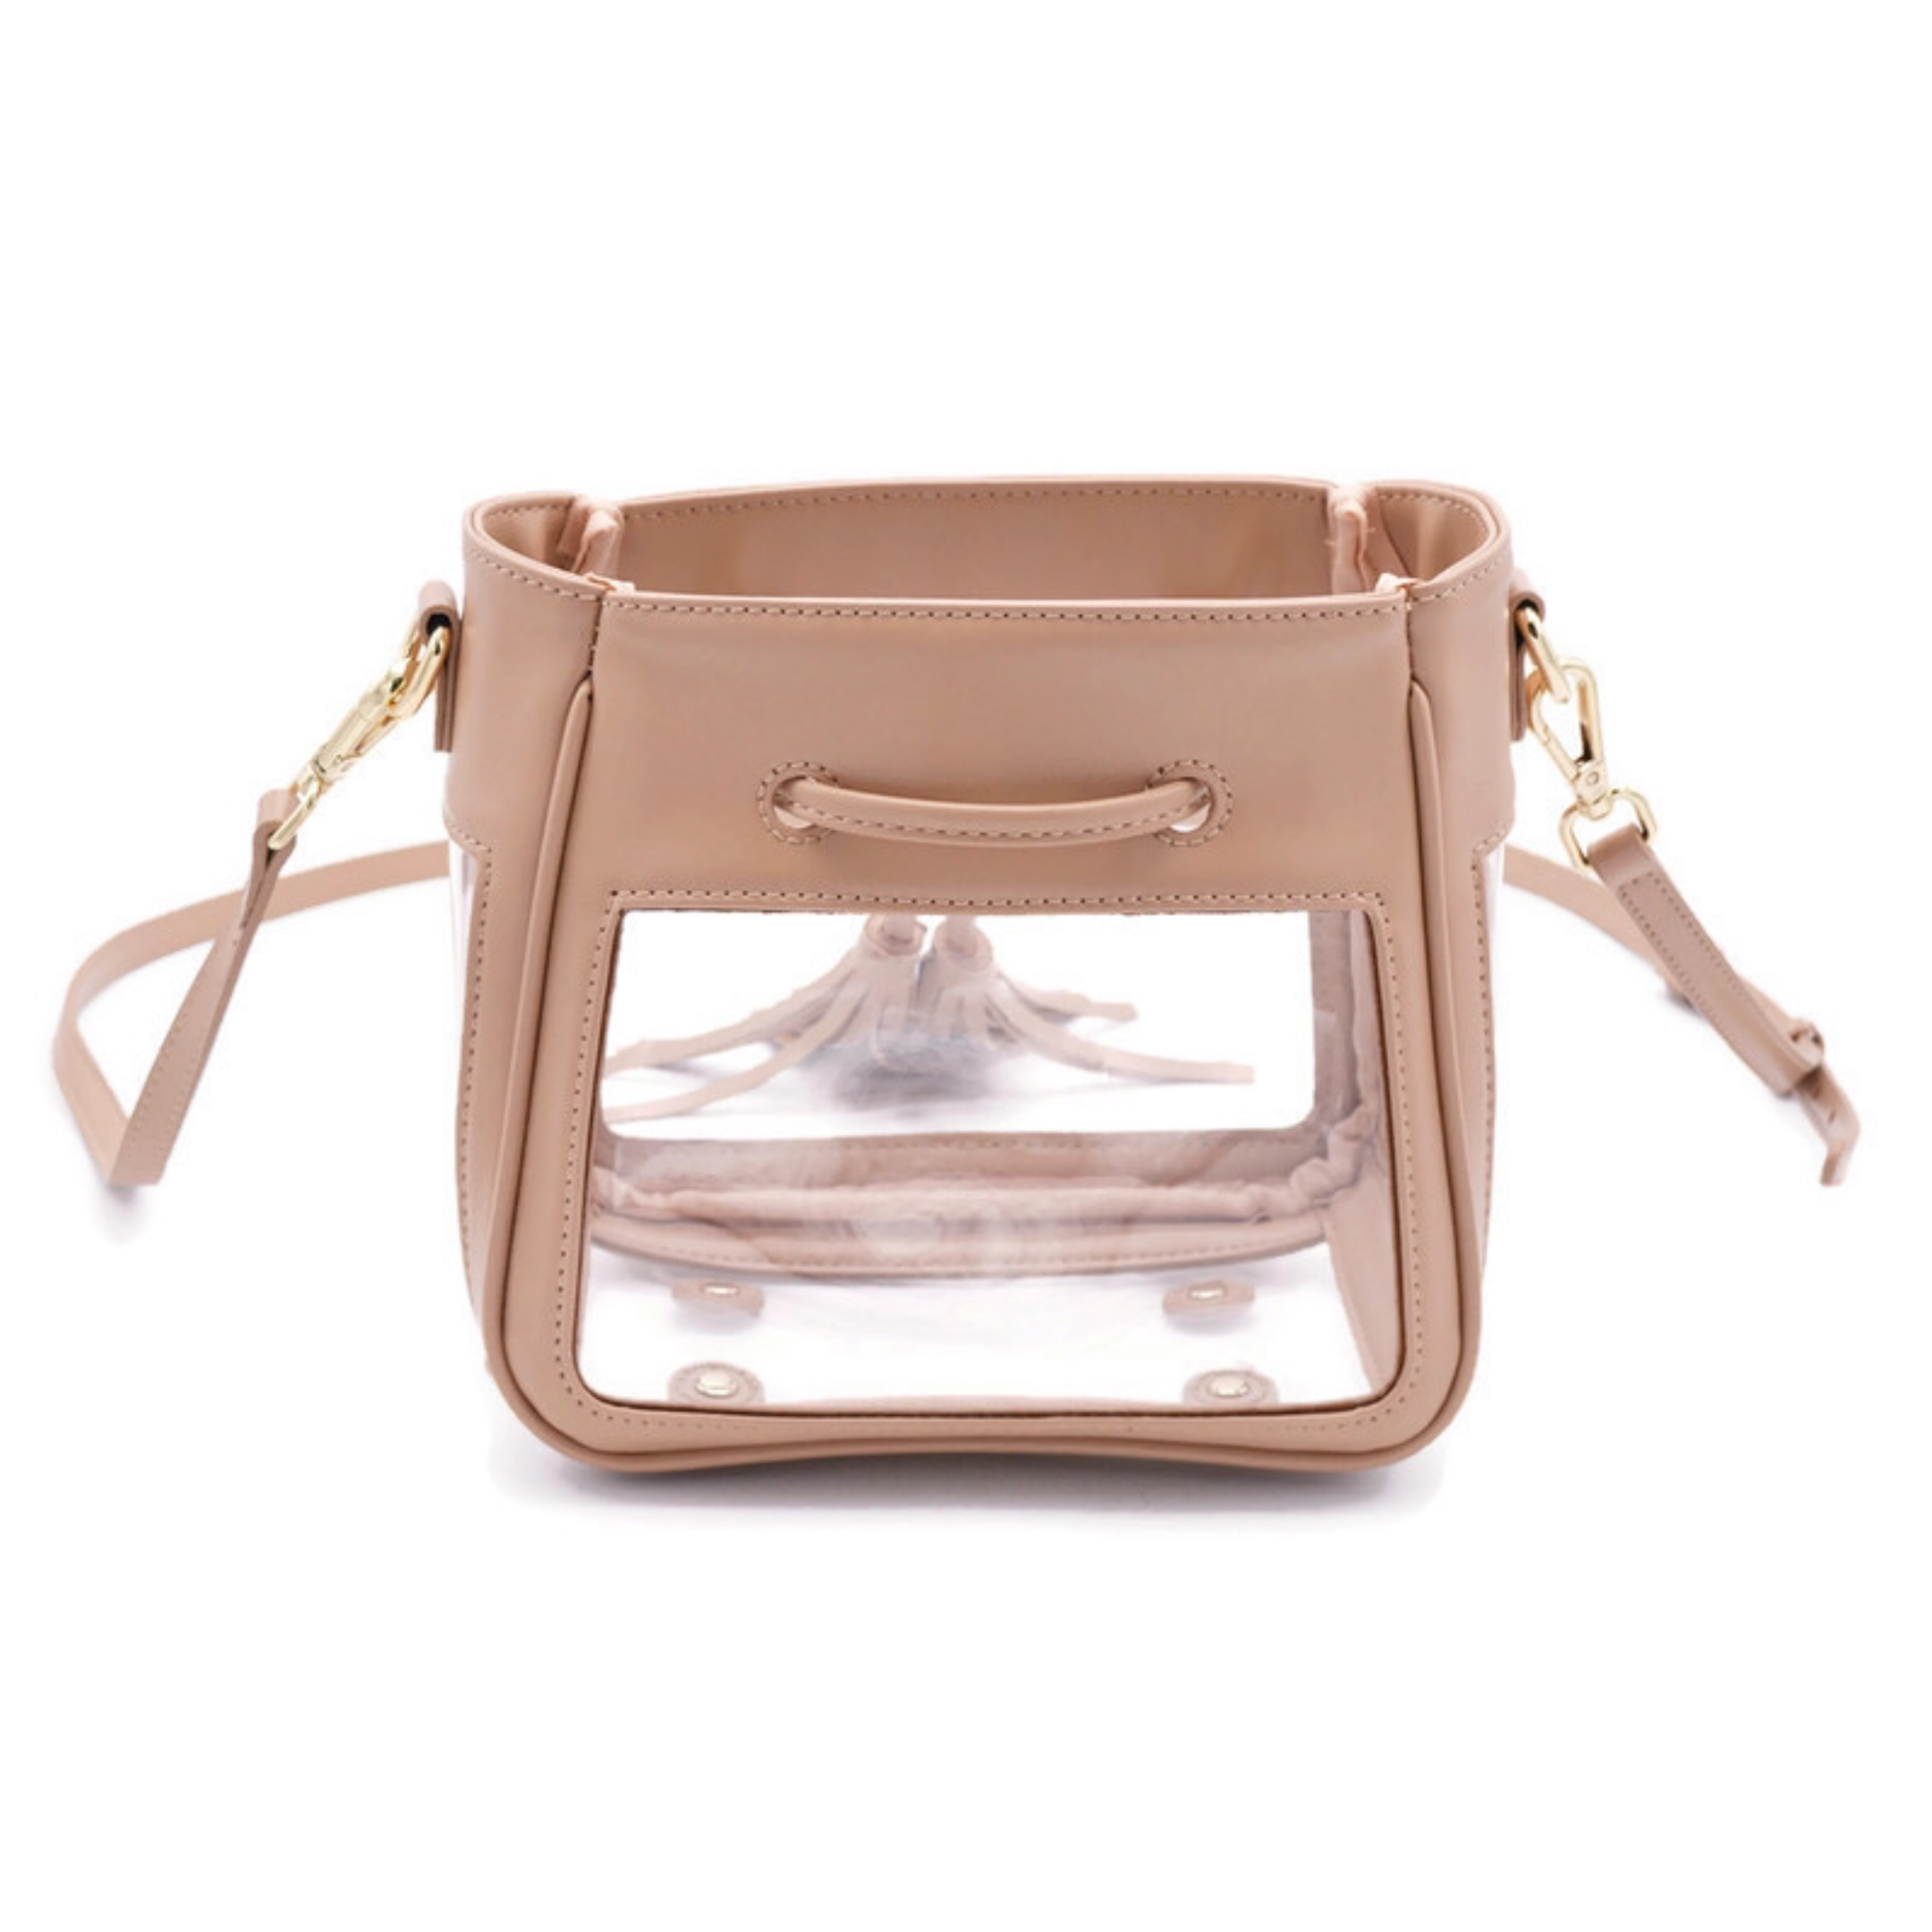 The Mini Bare Bucket | Sandcastle | Policy Handbags | Clear Bag Policy ...